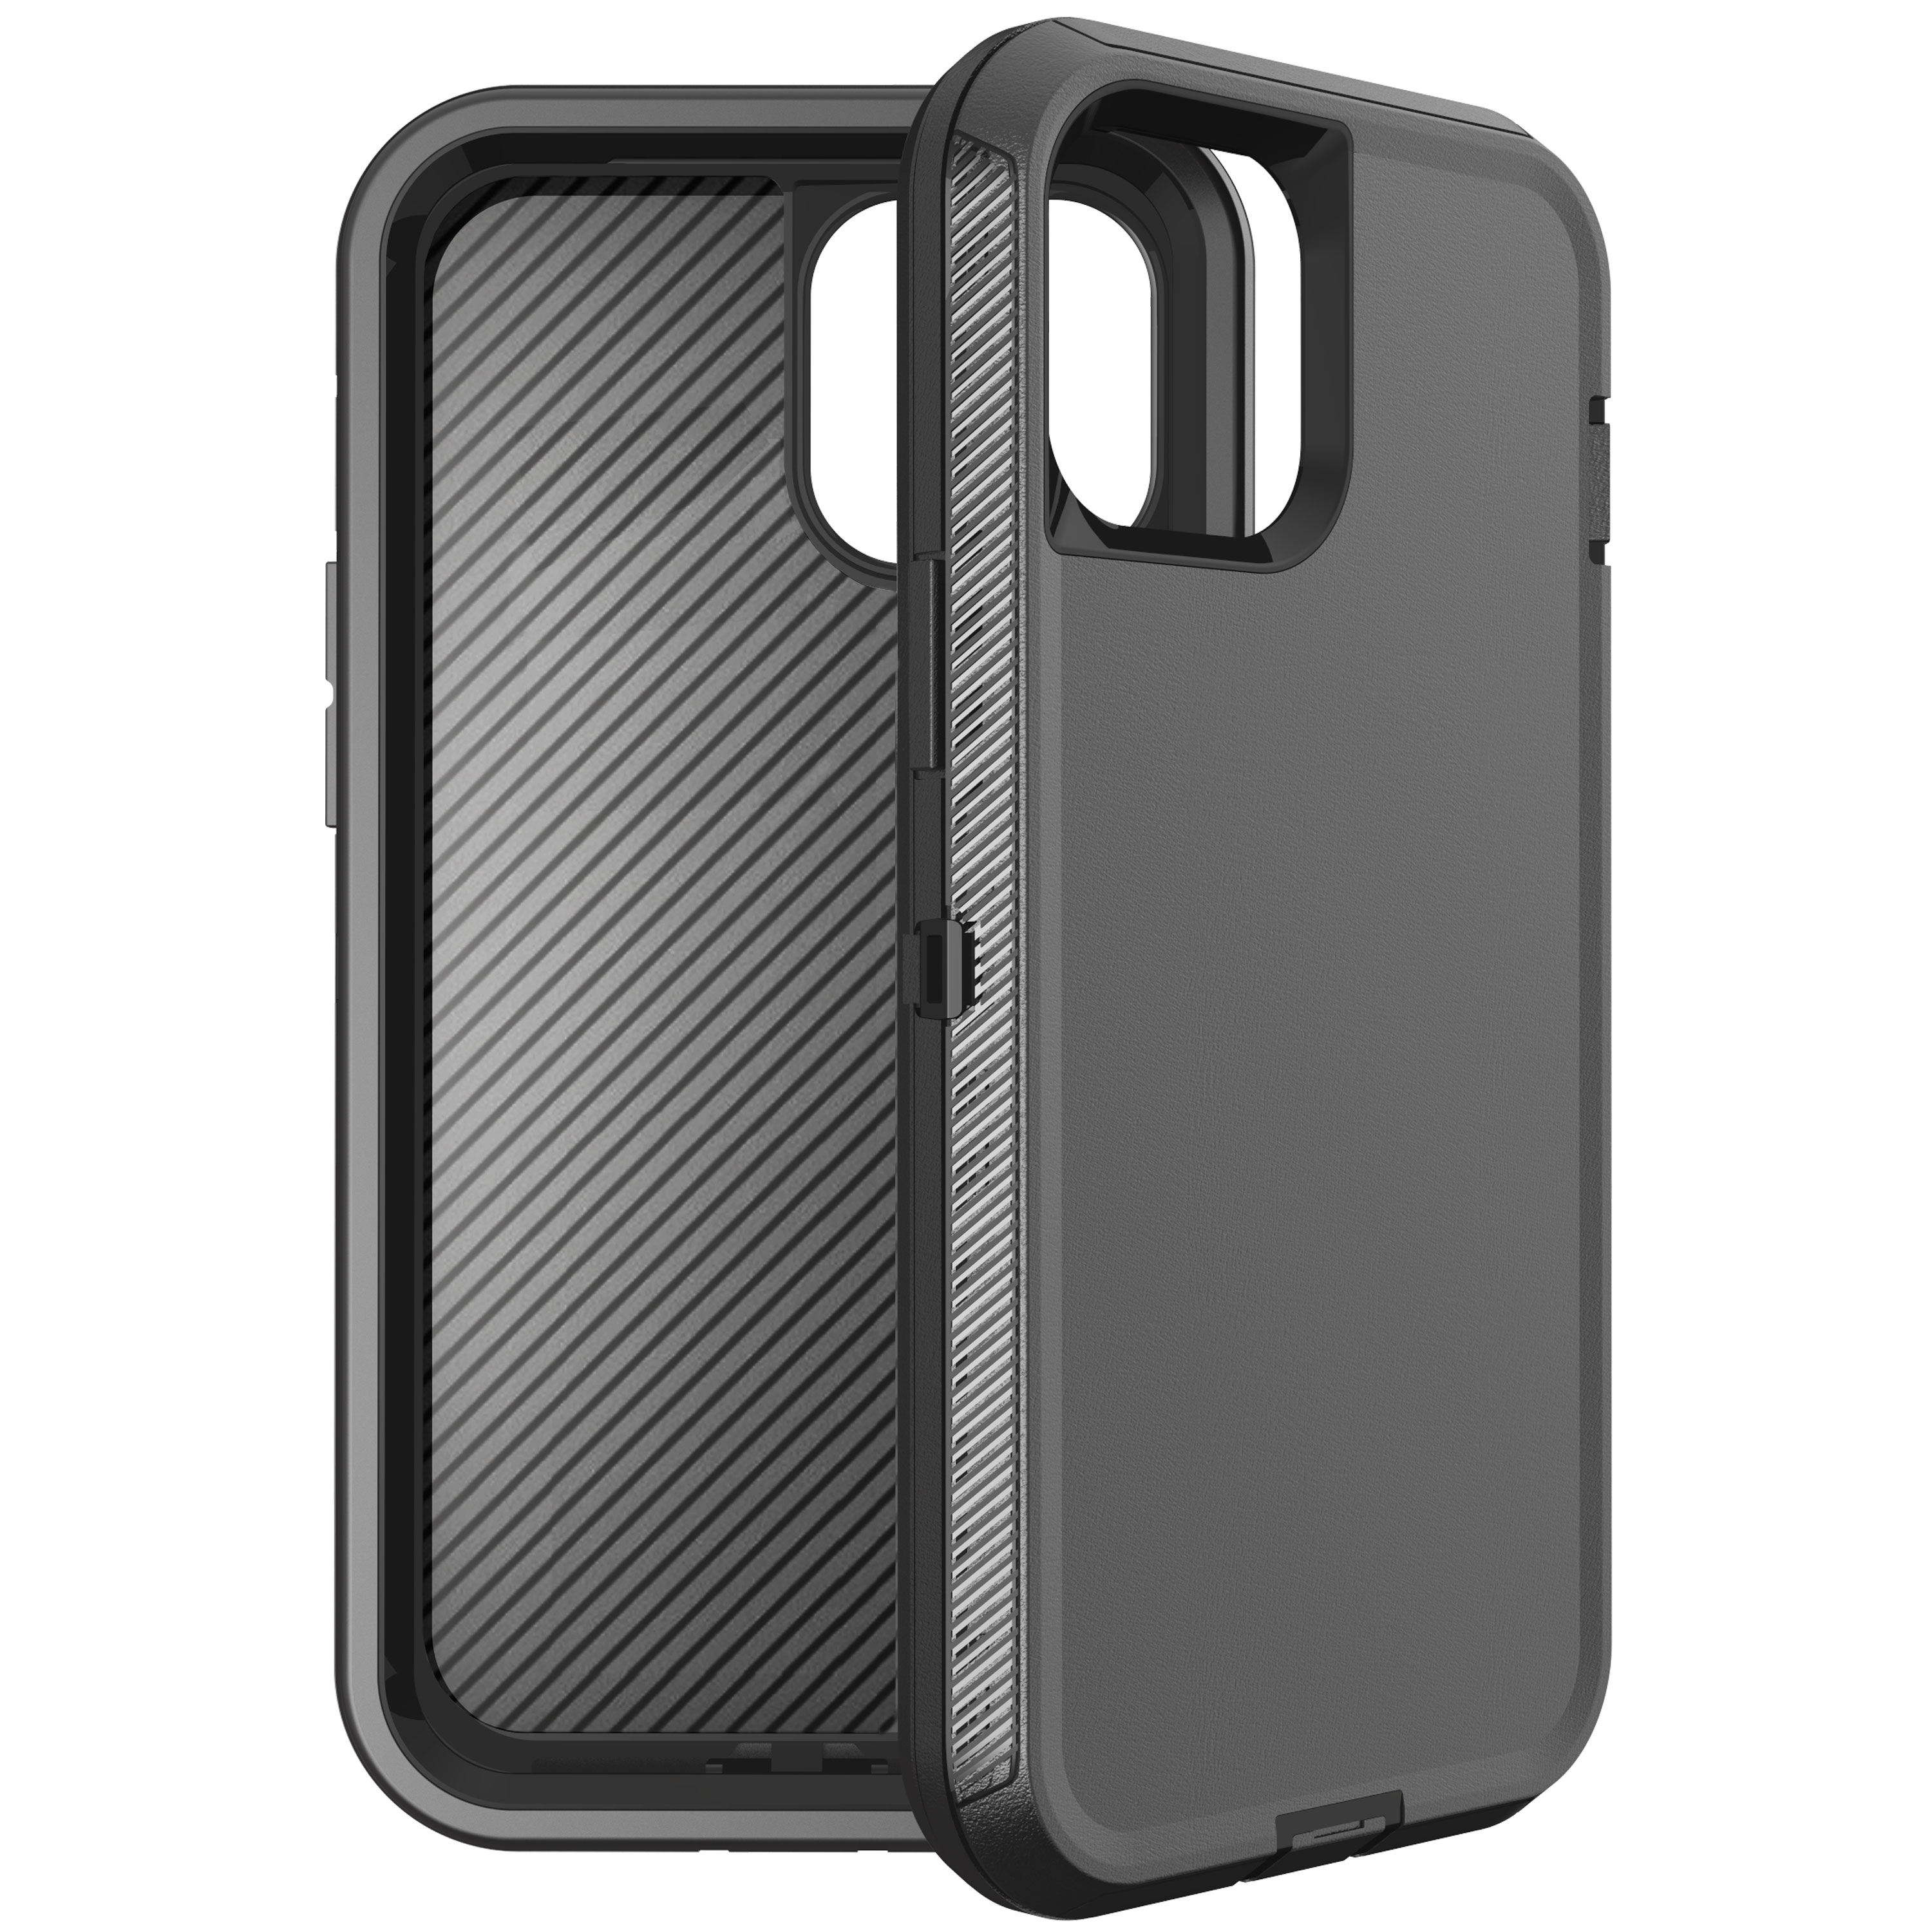 Armor Robot Case for iPHONE 12 / 12 Pro 6.1 (Black)